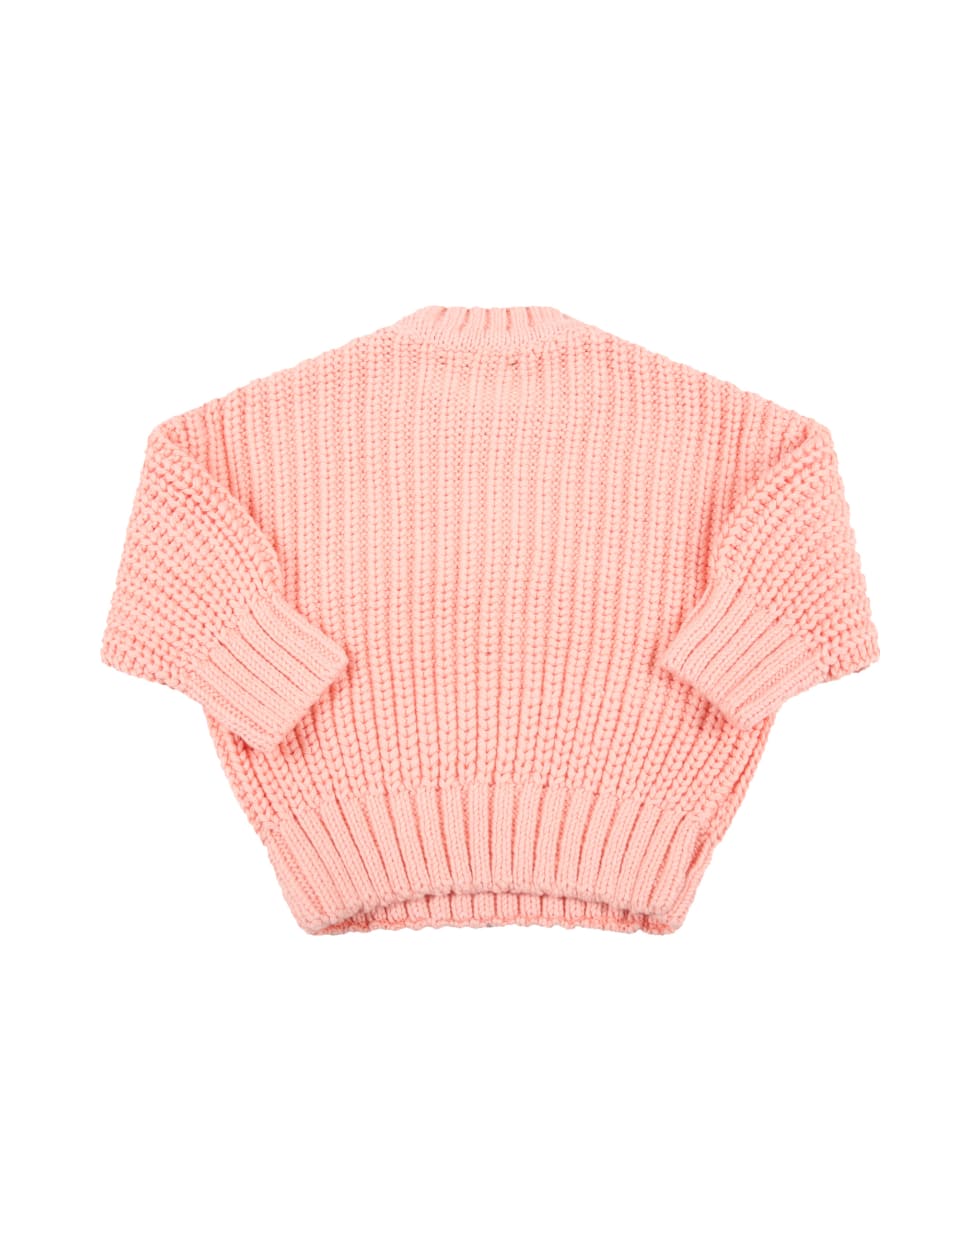 Mini Rodini Pink Sweater For Baby Girl With Bear - Pink